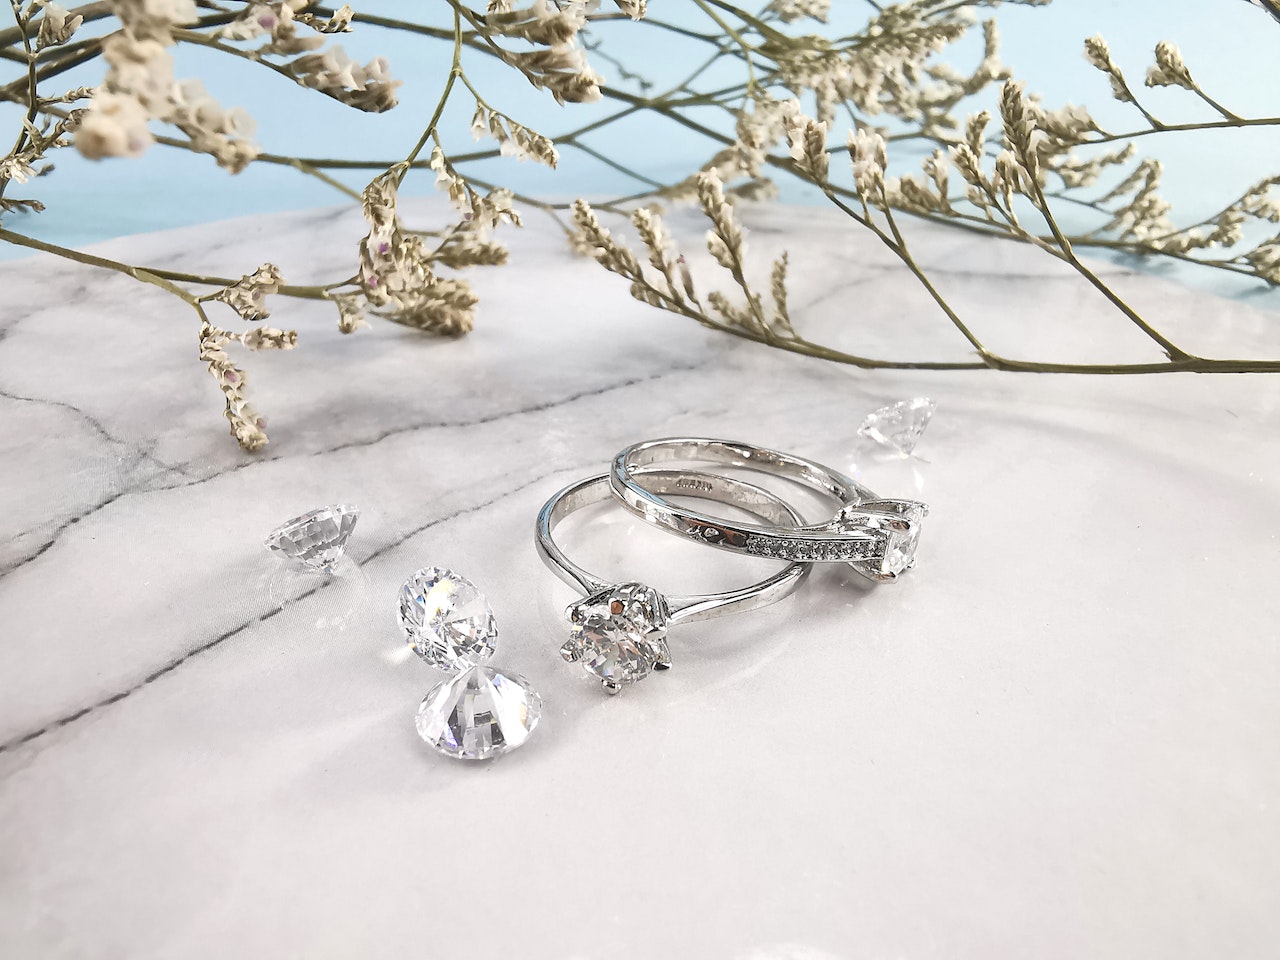 Rings and diamonds near the plant twigs